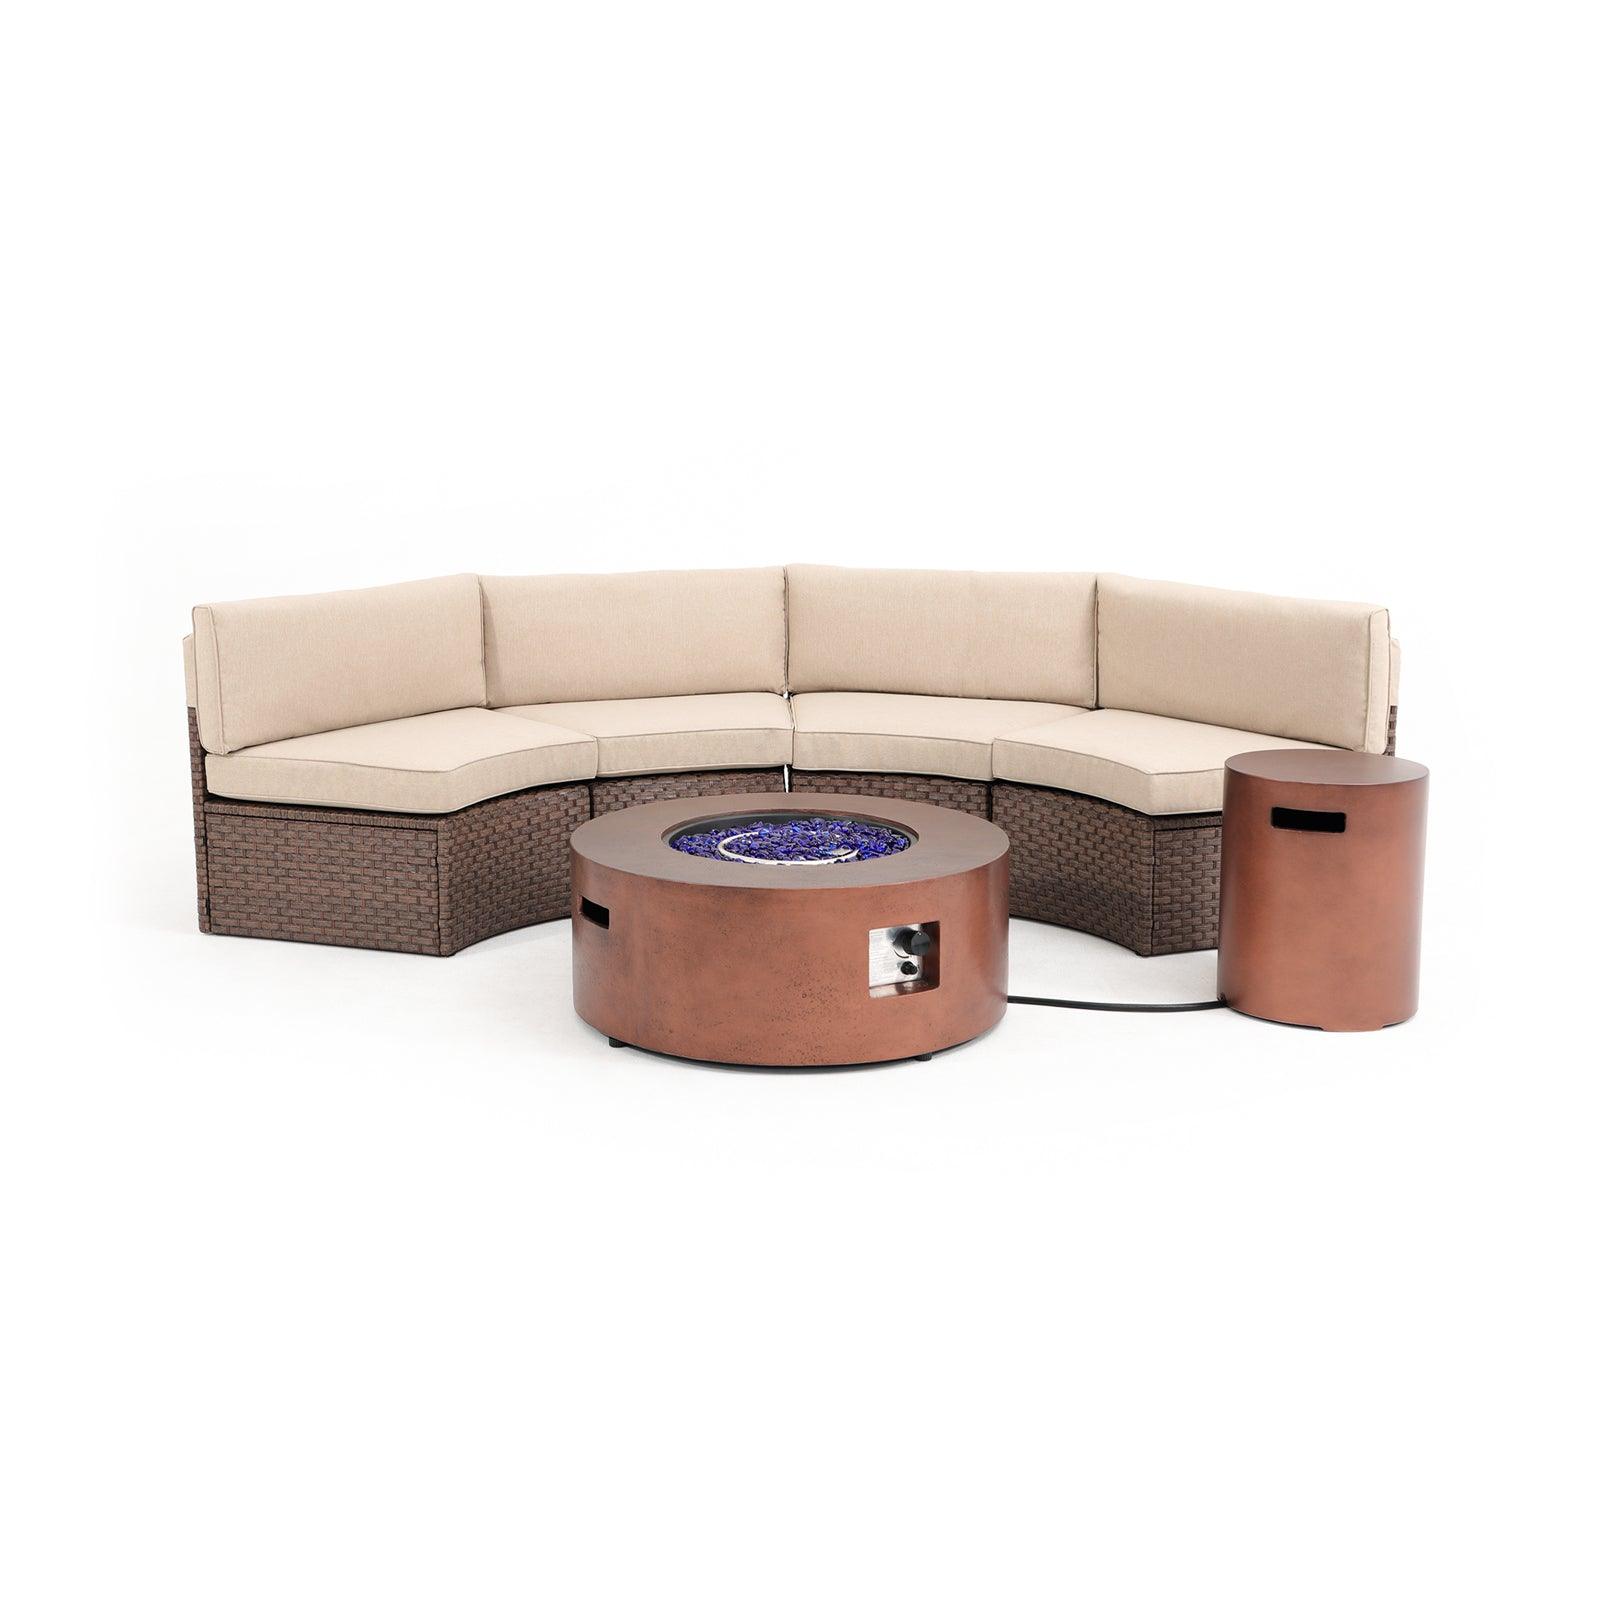 Boboli 4-seater brown Wicker Curved Sectional sofas with beige cushions + 1 brown Propane Fire Pit with tank holder, front view - Jardina Furniture#color_Brown #piece_5-pc.